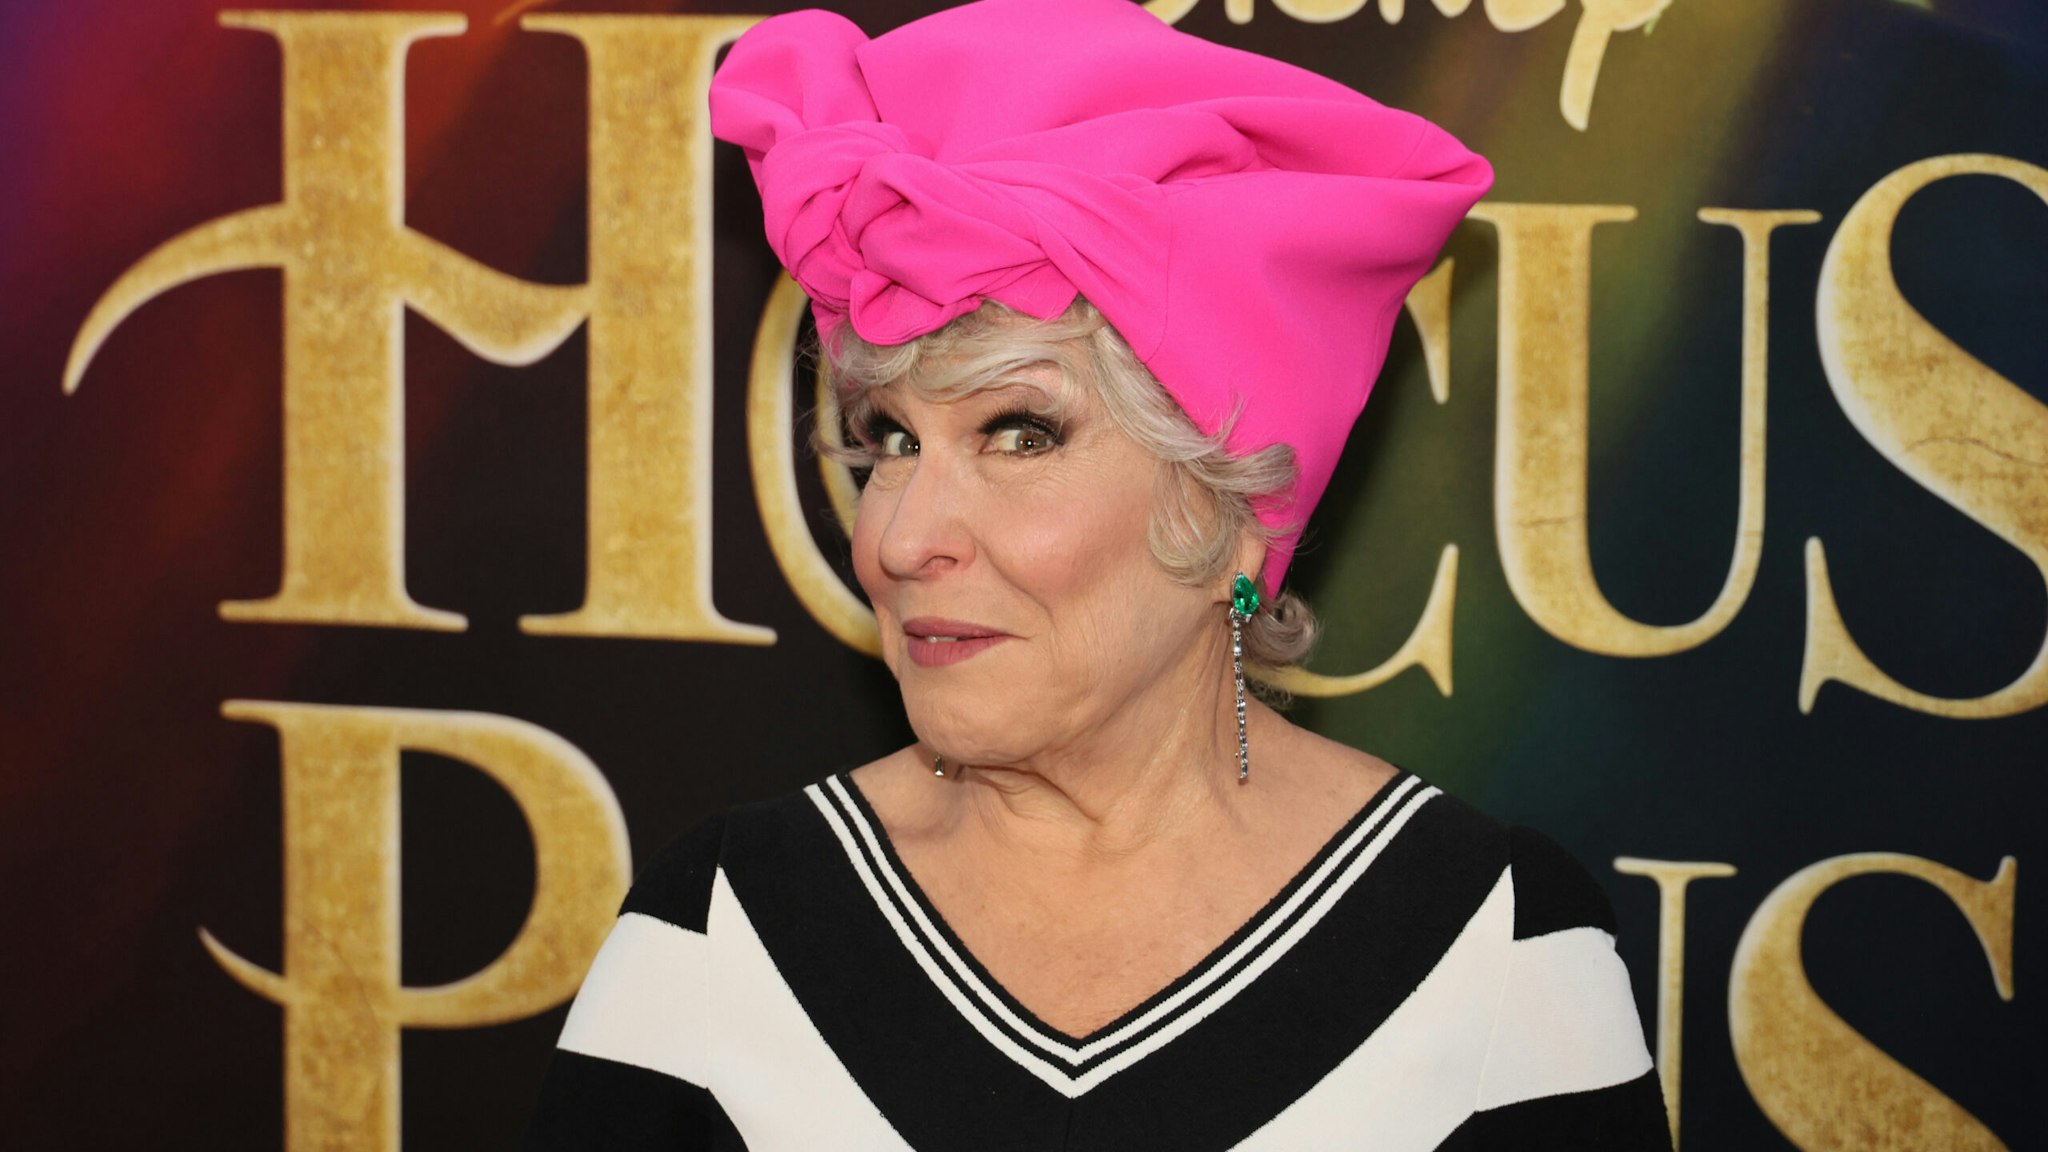 Bette Midler lost her temper and grossed out the internet this week over a snarky retort to her tweet calling for more use of solar energy to combat climate change.